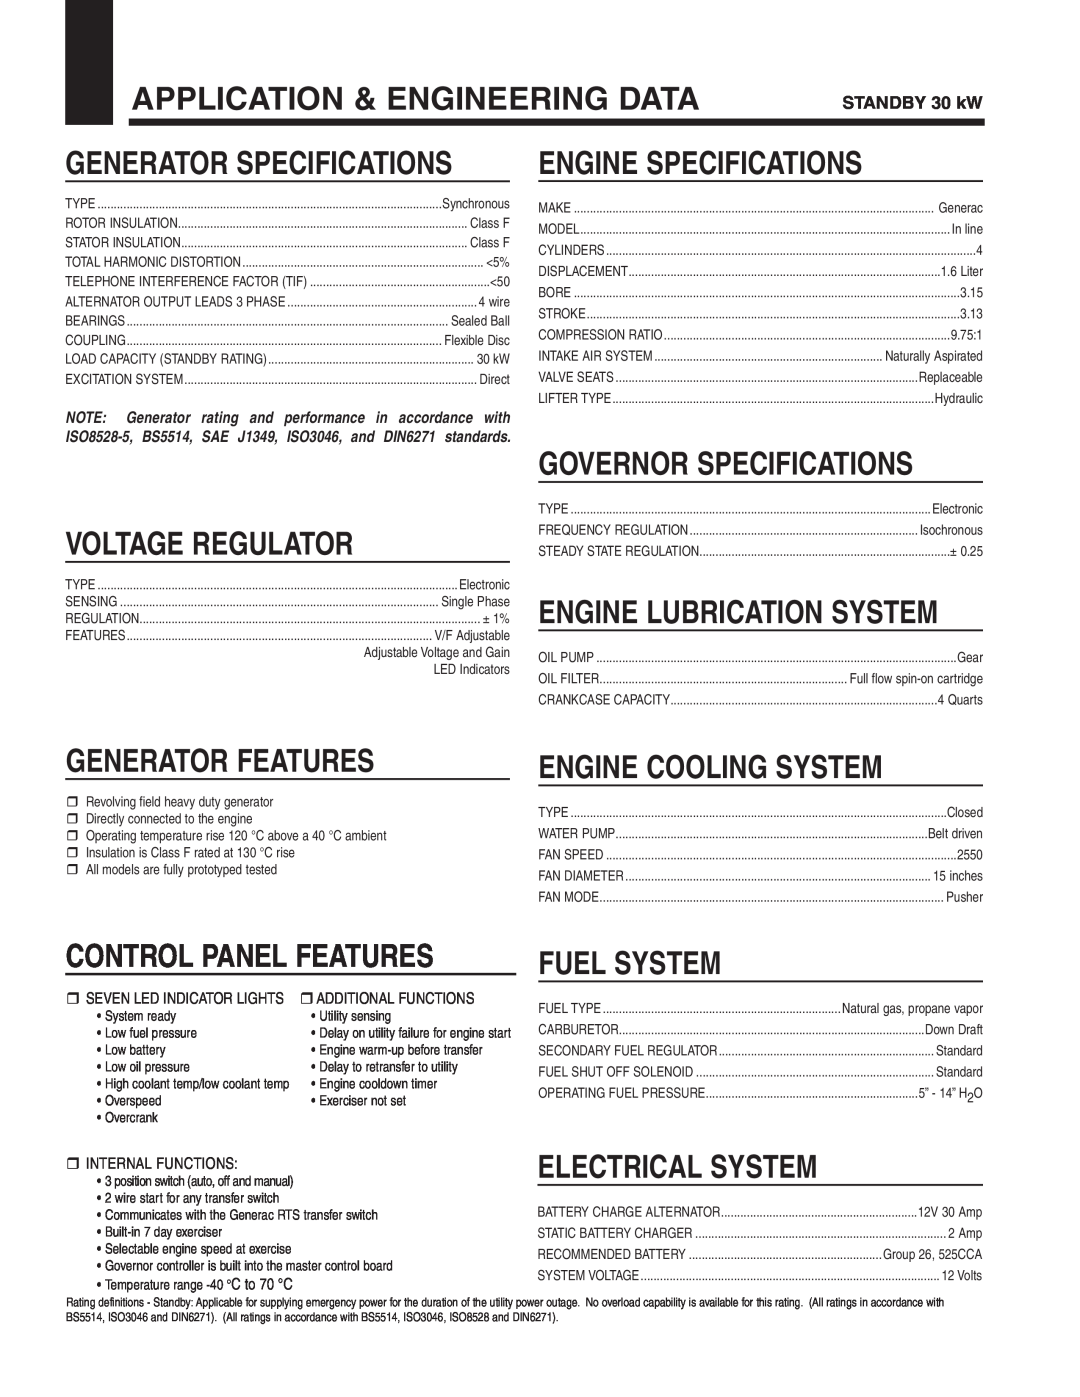 Generac Power Systems 05402 Application & Engineering Data, Engine Specifications, Voltage Regulator, Generator Features 